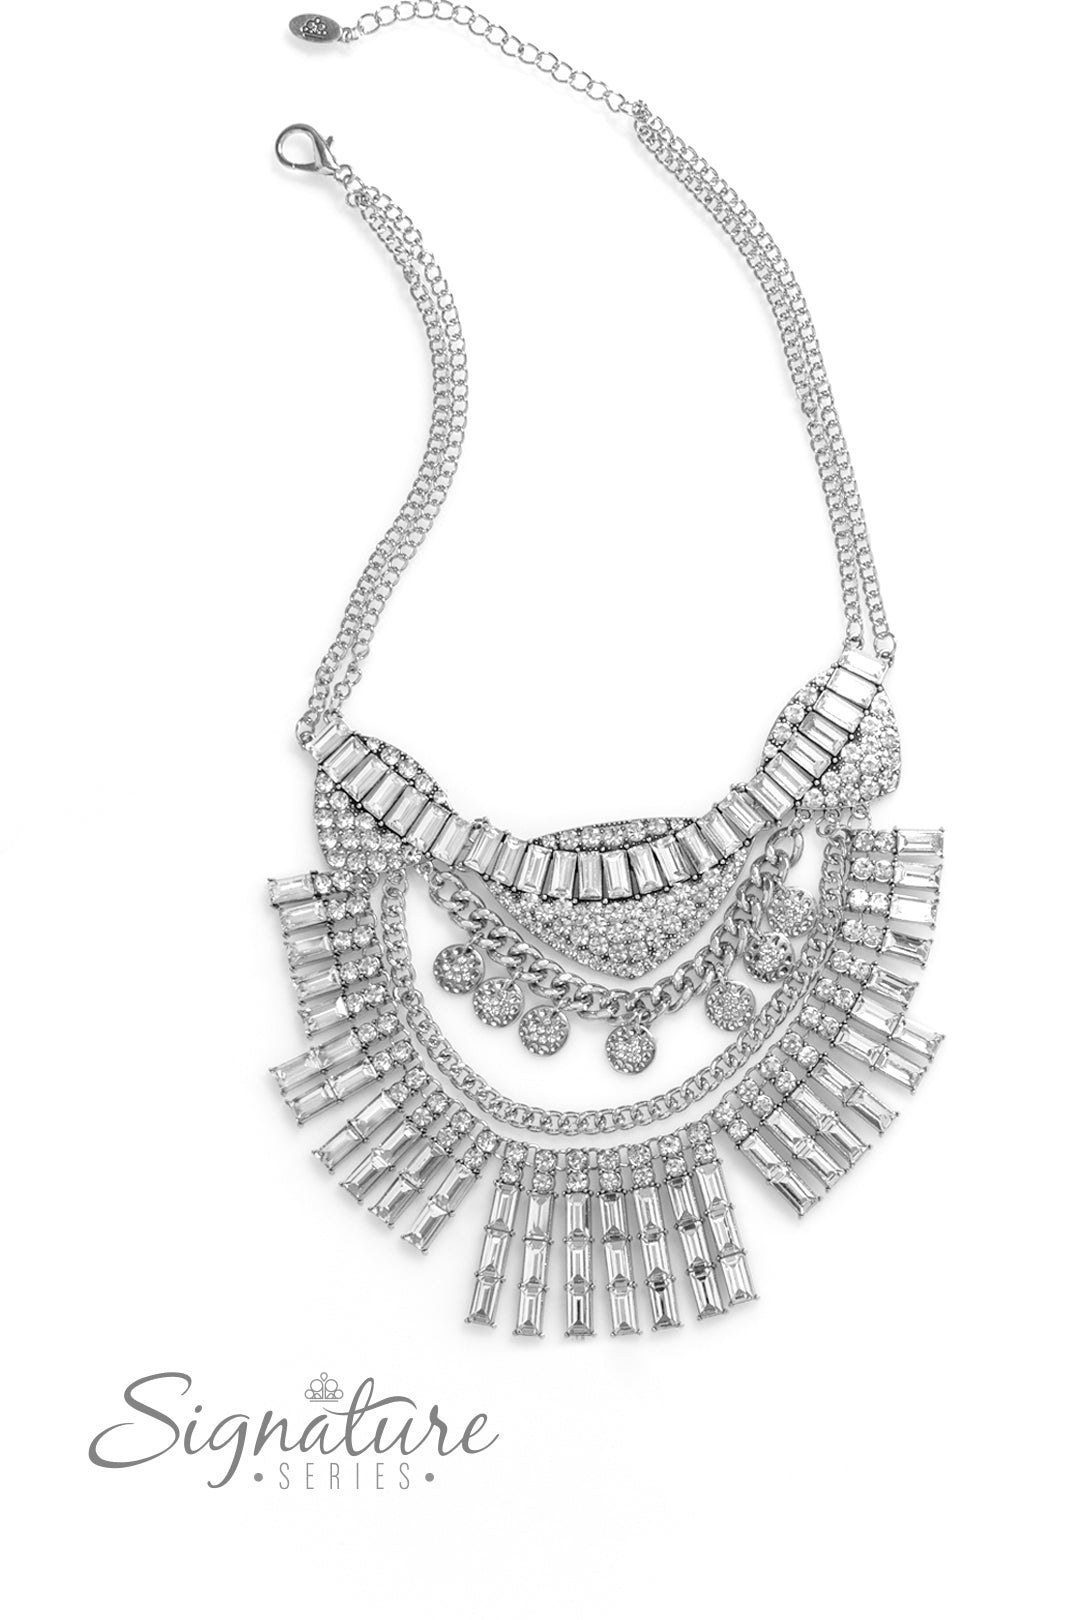 Paparazzi Accessories The Nedra Oversized chain links, silver discs hammered in texture, and a blinding display of brilliant white rhinestones combine to create an iconic statement piece. At the top of the elaborate display, three spade-like pendants fill